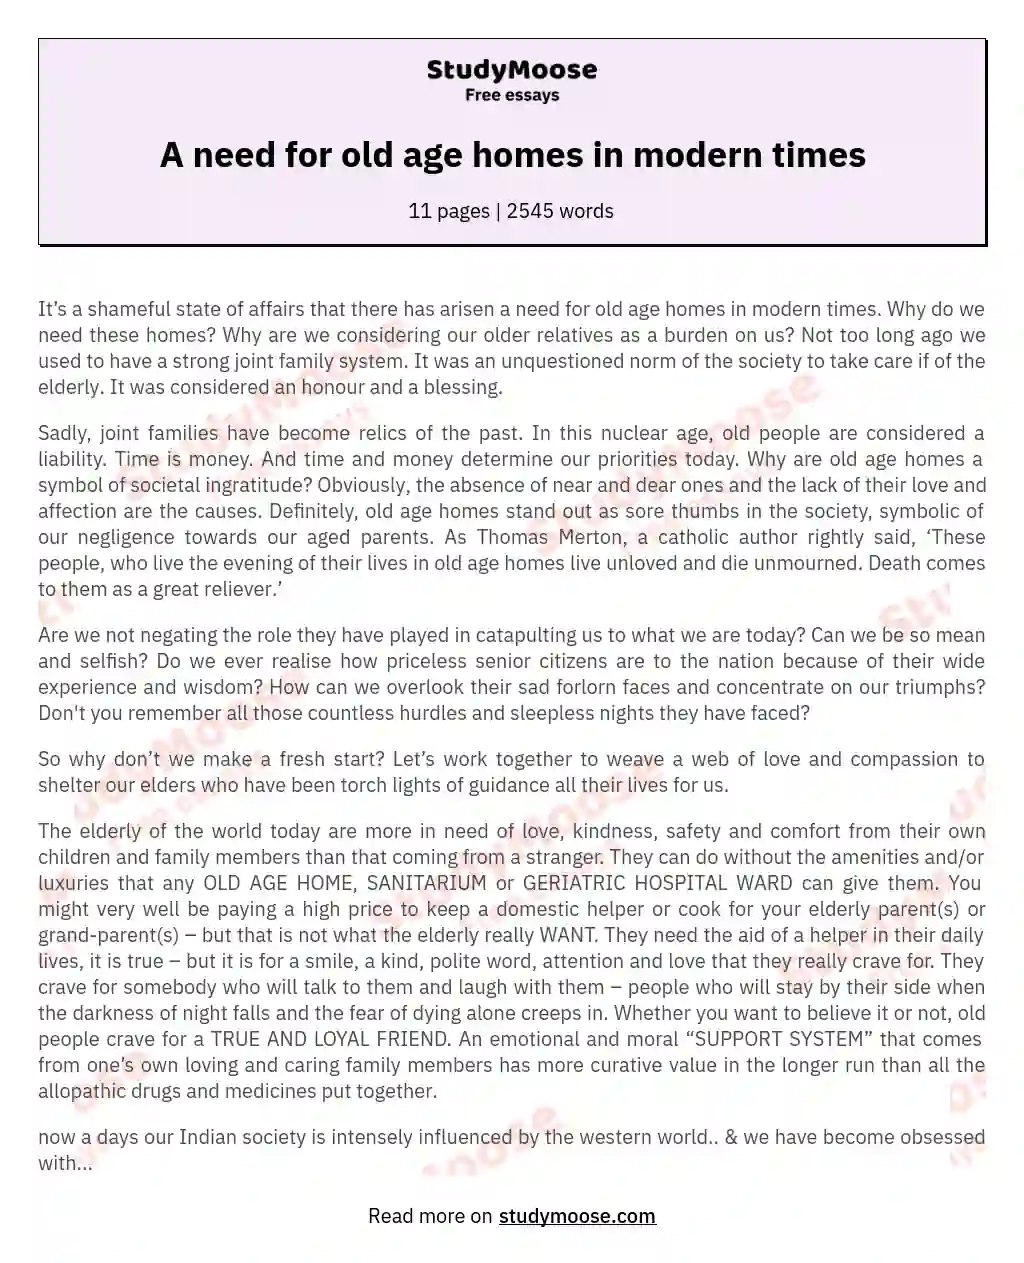 A need for old age homes in modern times essay